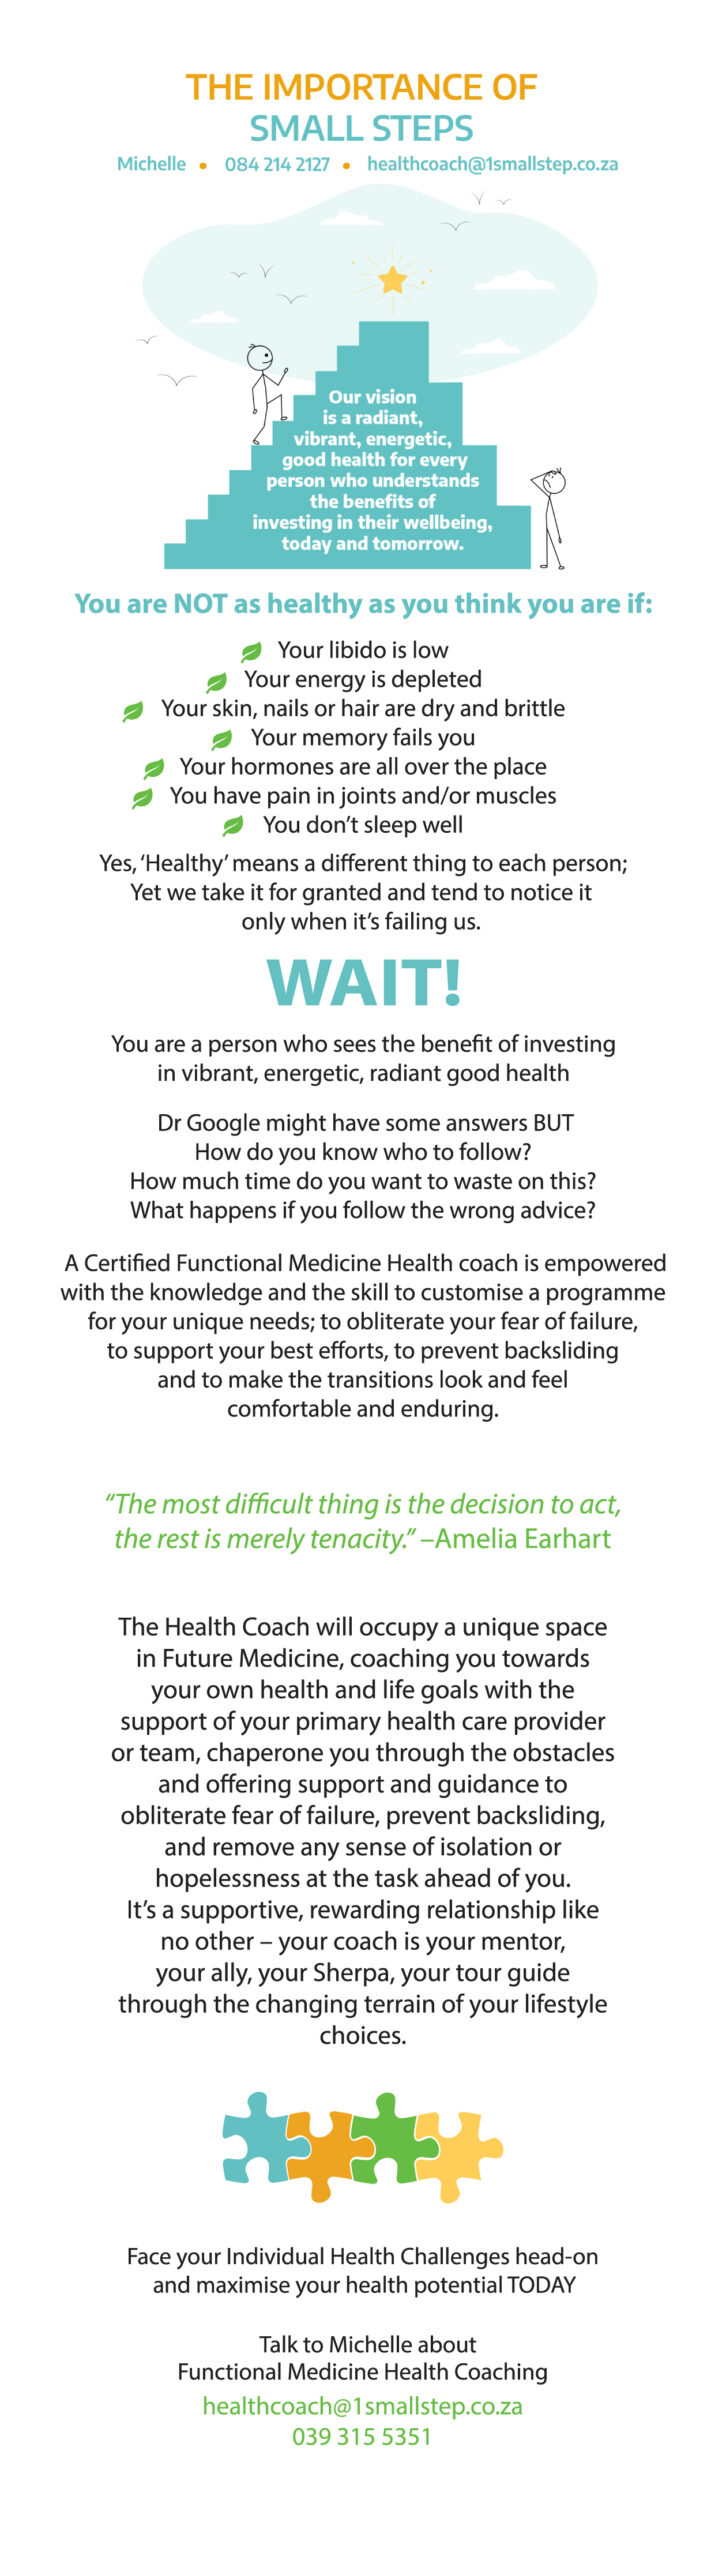 one-small-step-health-coaching